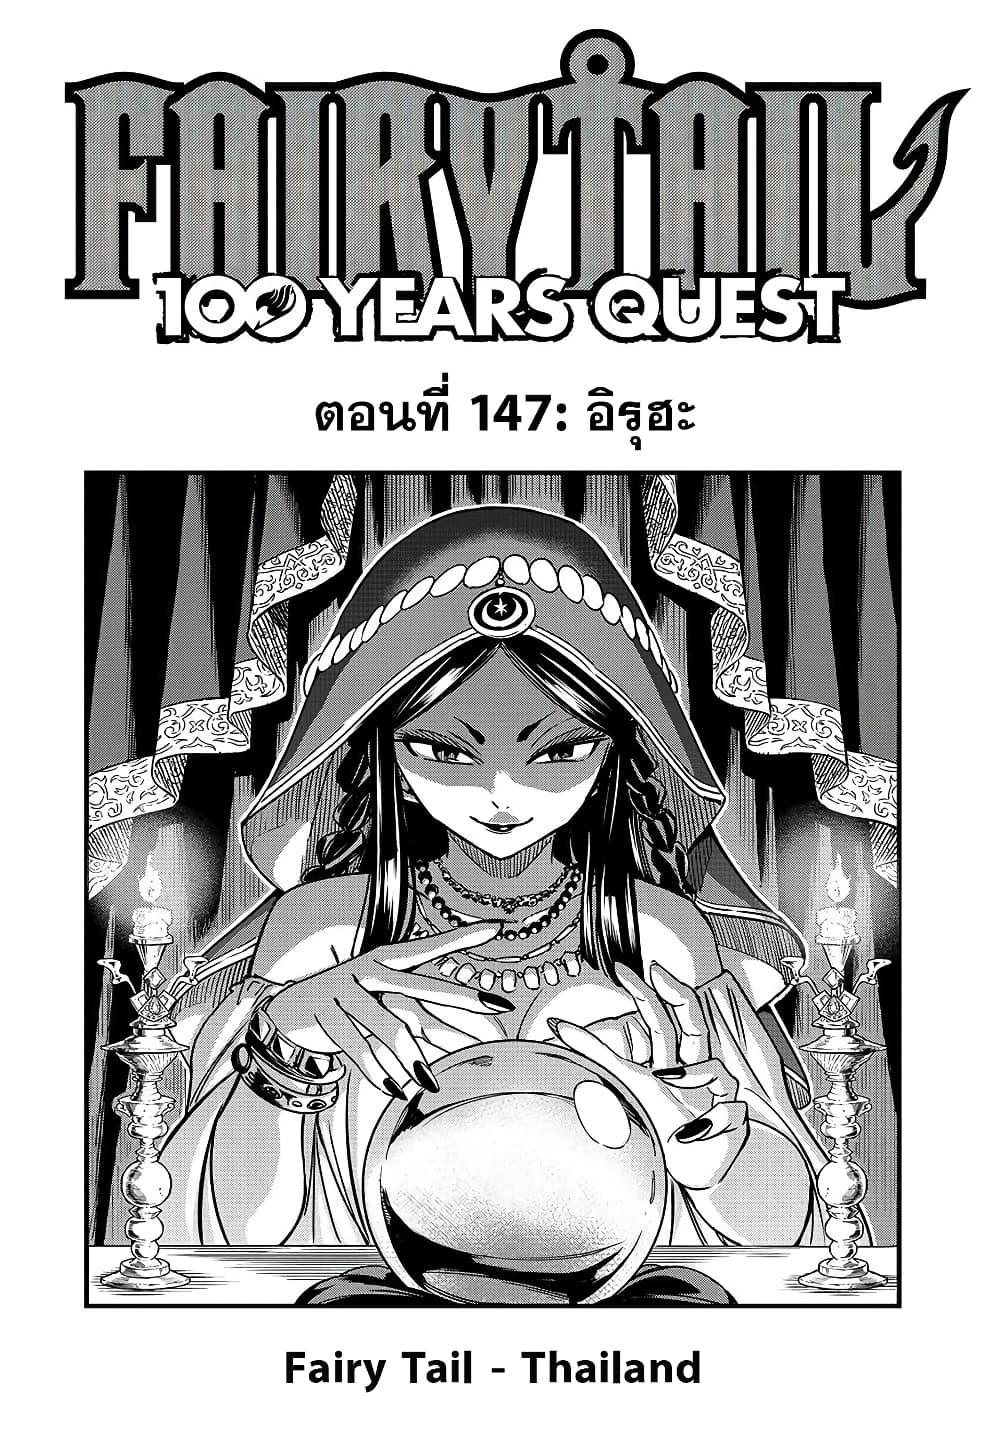 Fairy Tail 100 Years Quest ตอนที่ 147 (1)